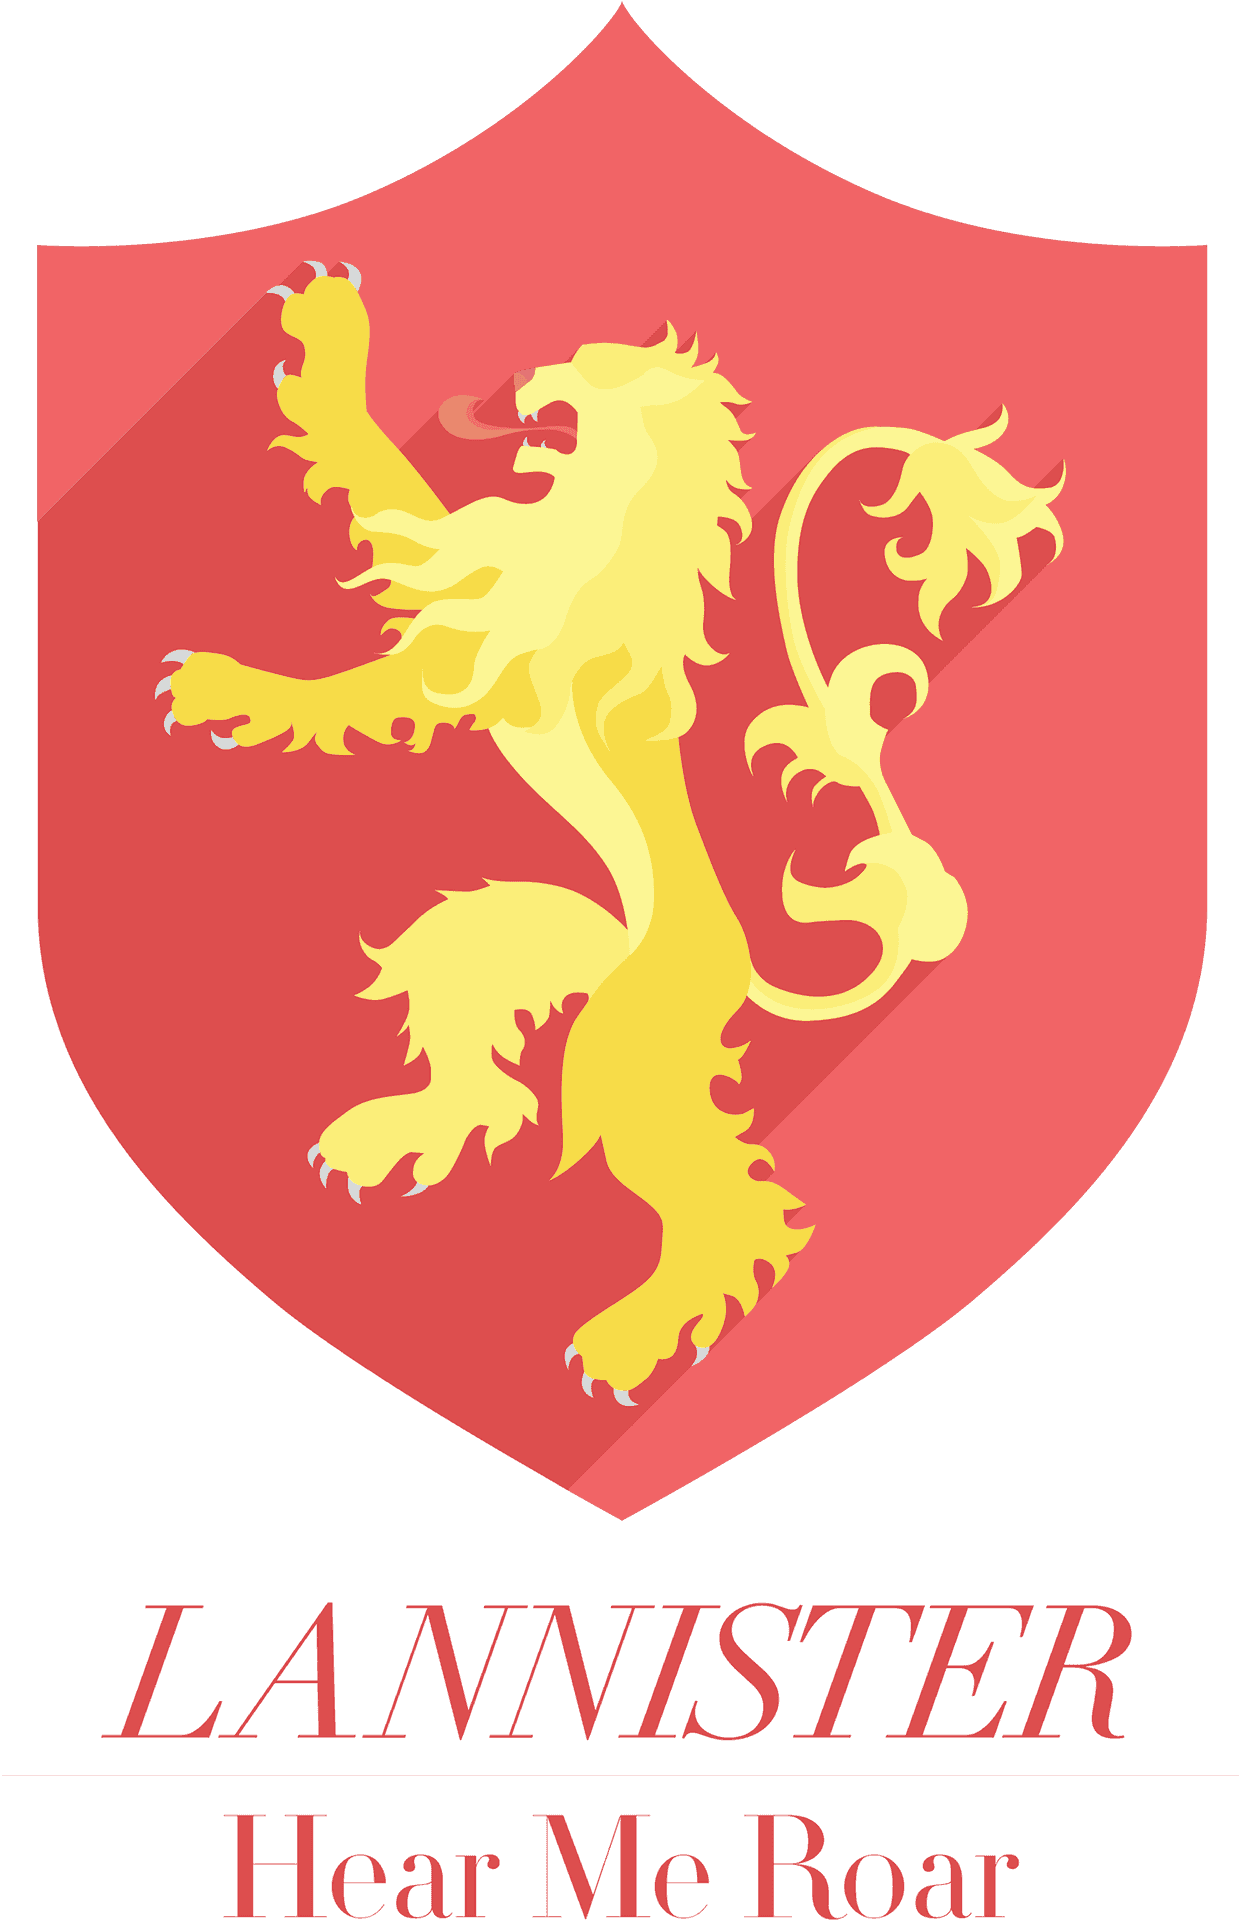 Lannister House Sigil Gameof Thrones PNG image